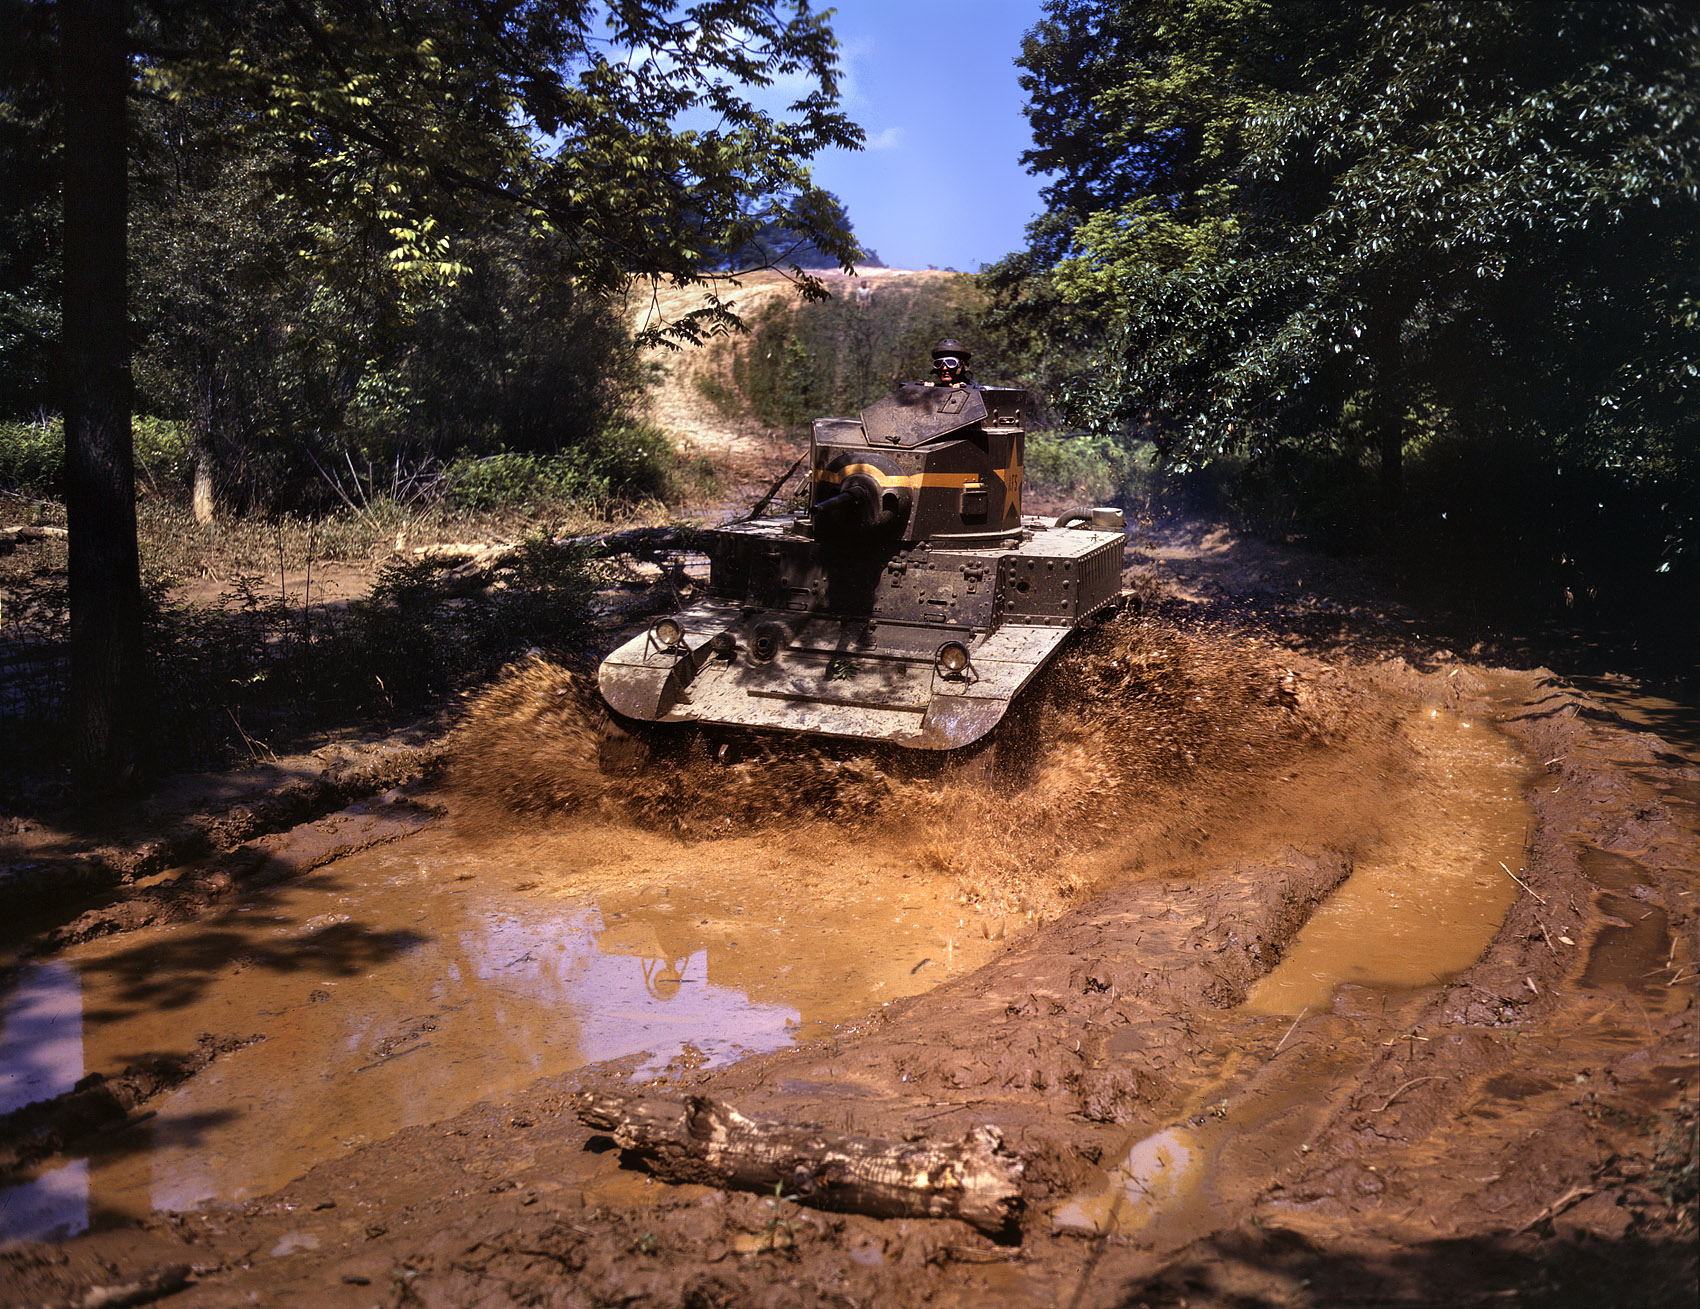 Fort Knox, June 1942. "Light tank going through water obstacle." View full size. 4x5 Kodachrome transparency by Alfred Palmer, Office of War Information.